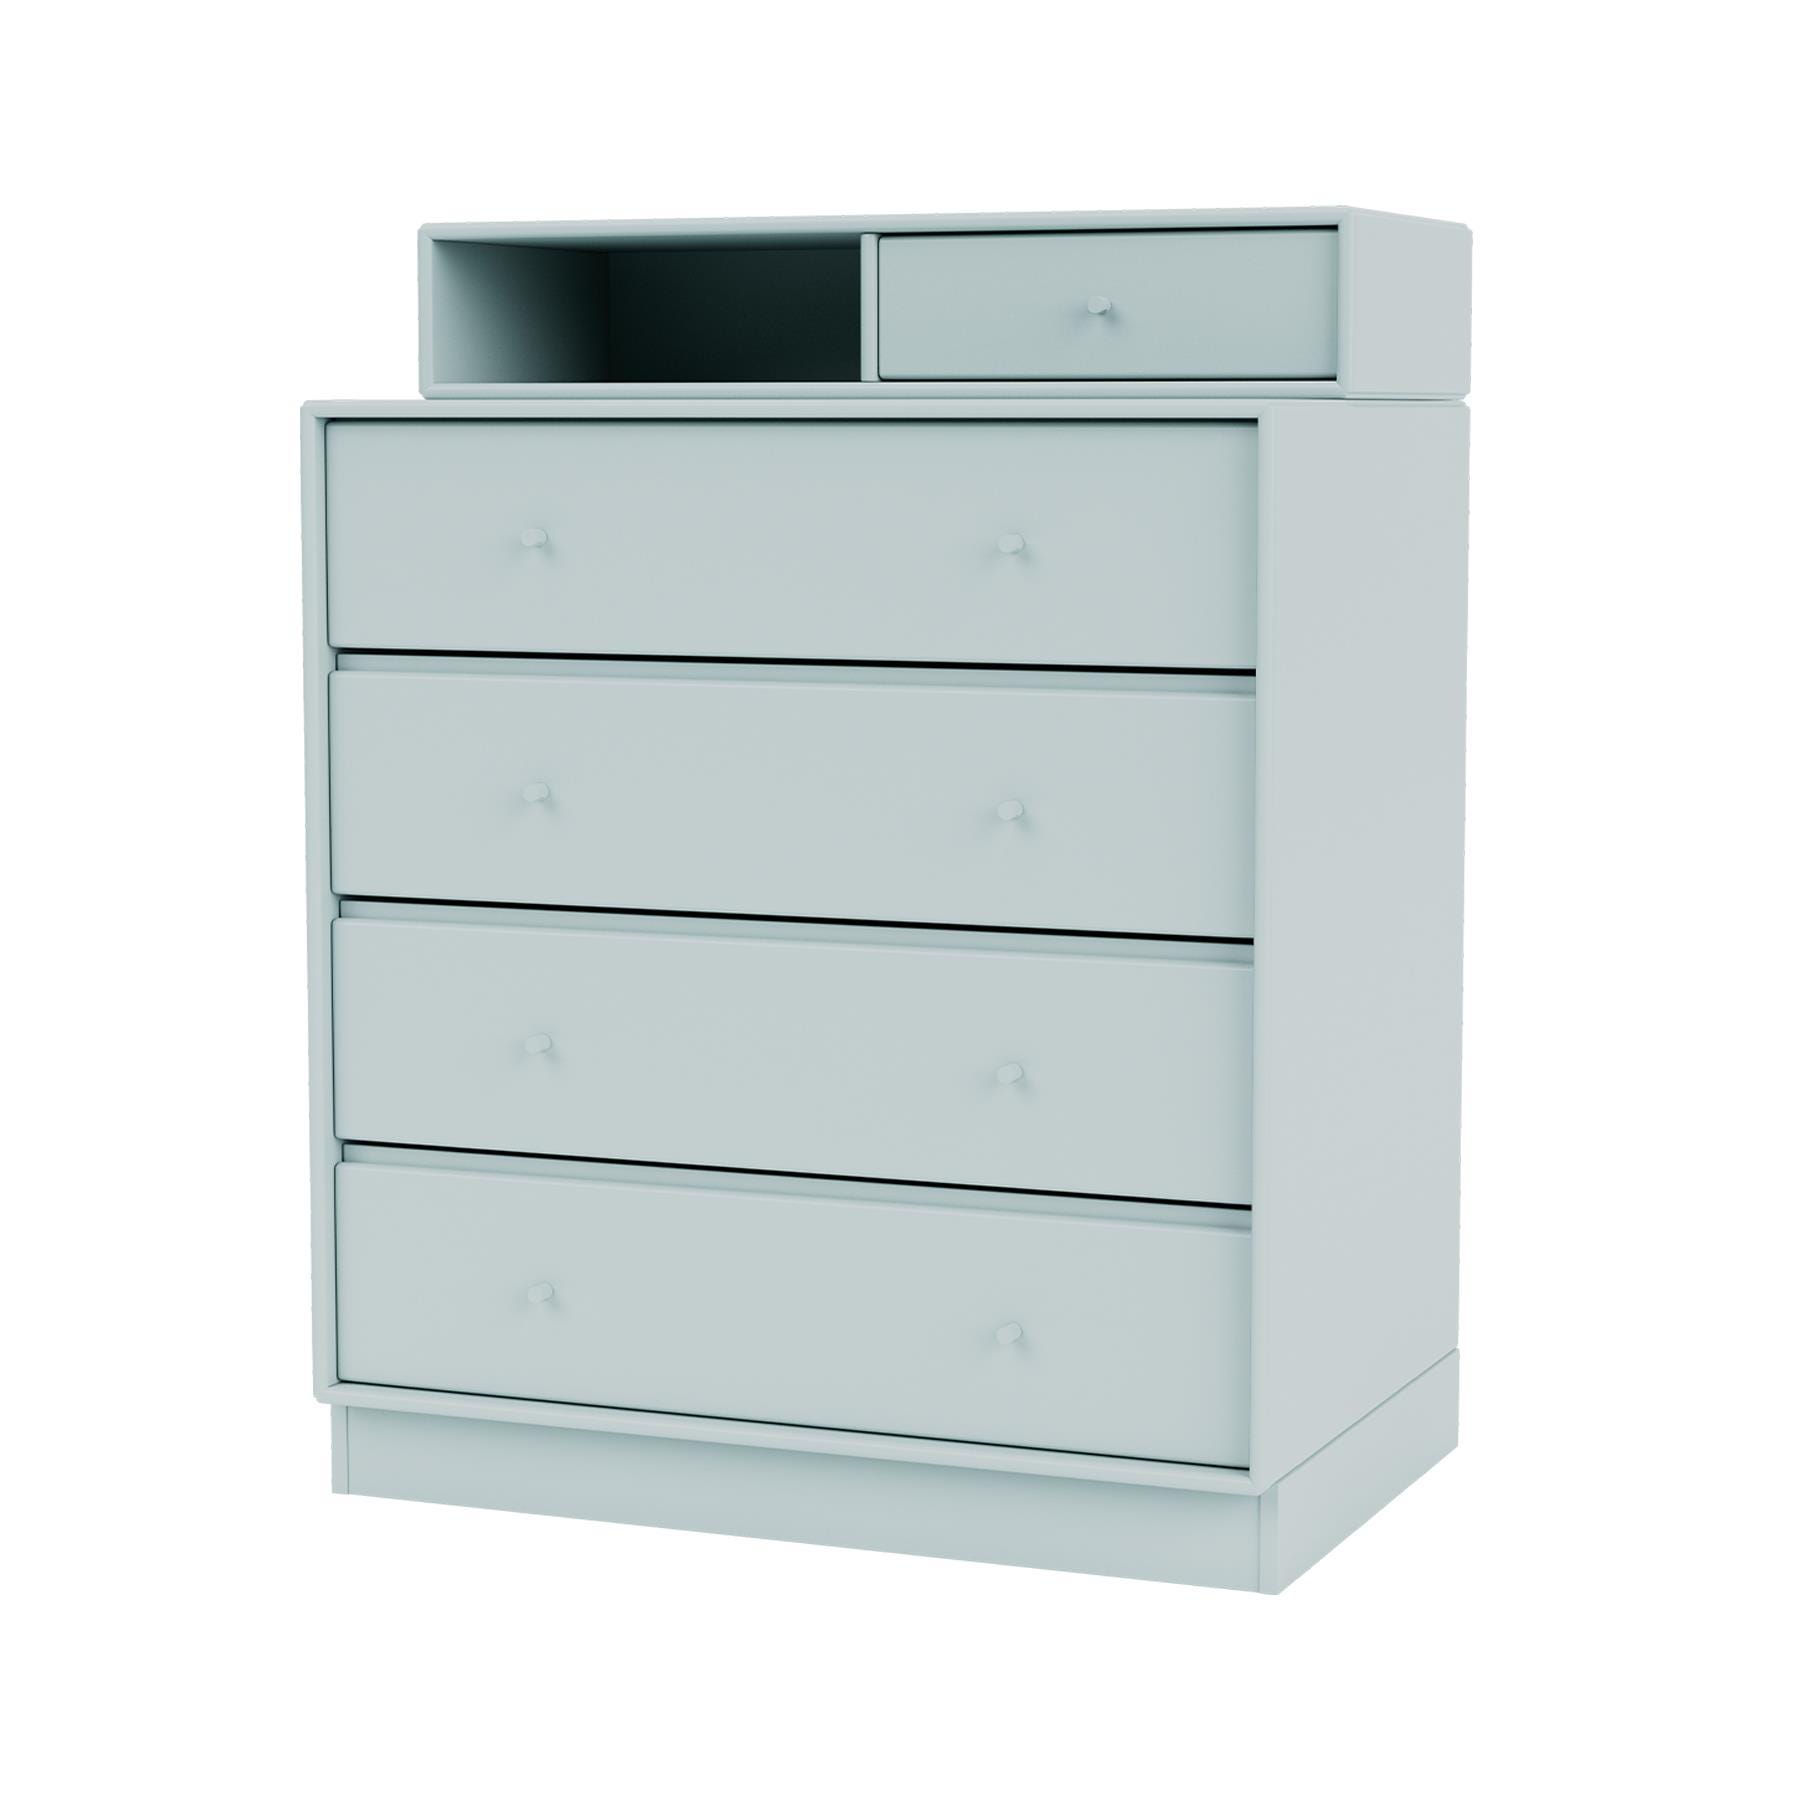 Montana Keep Chest Of Drawers Flint Plinth Blue Designer Furniture From Holloways Of Ludlow